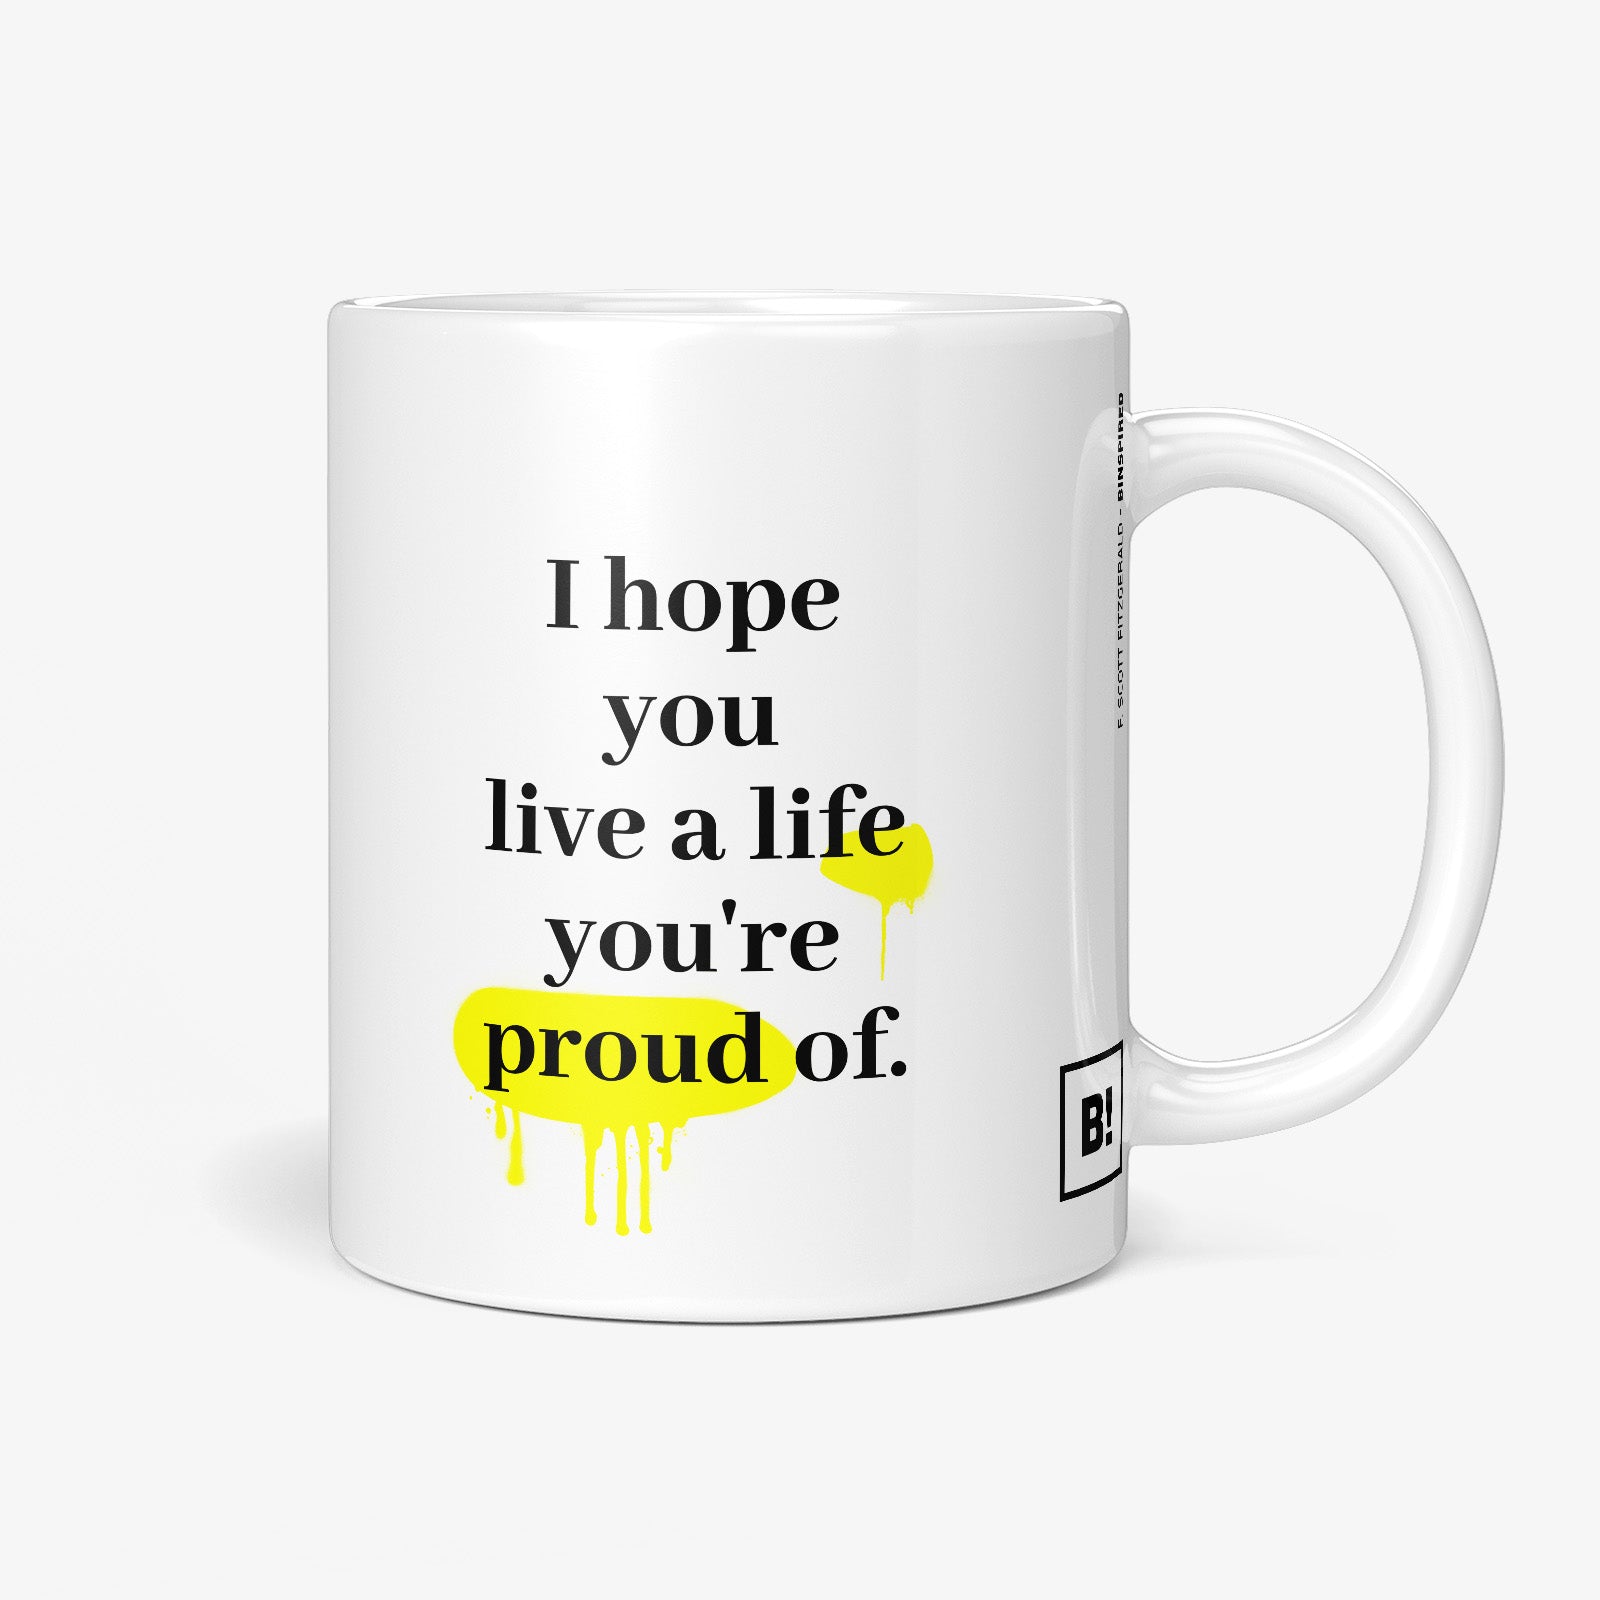 Be inspired by F. Scott Fitzgerald's famous quote, "I hope you live a life you're proud of" on this white and glossy 11oz coffee mug with the handle on the right.